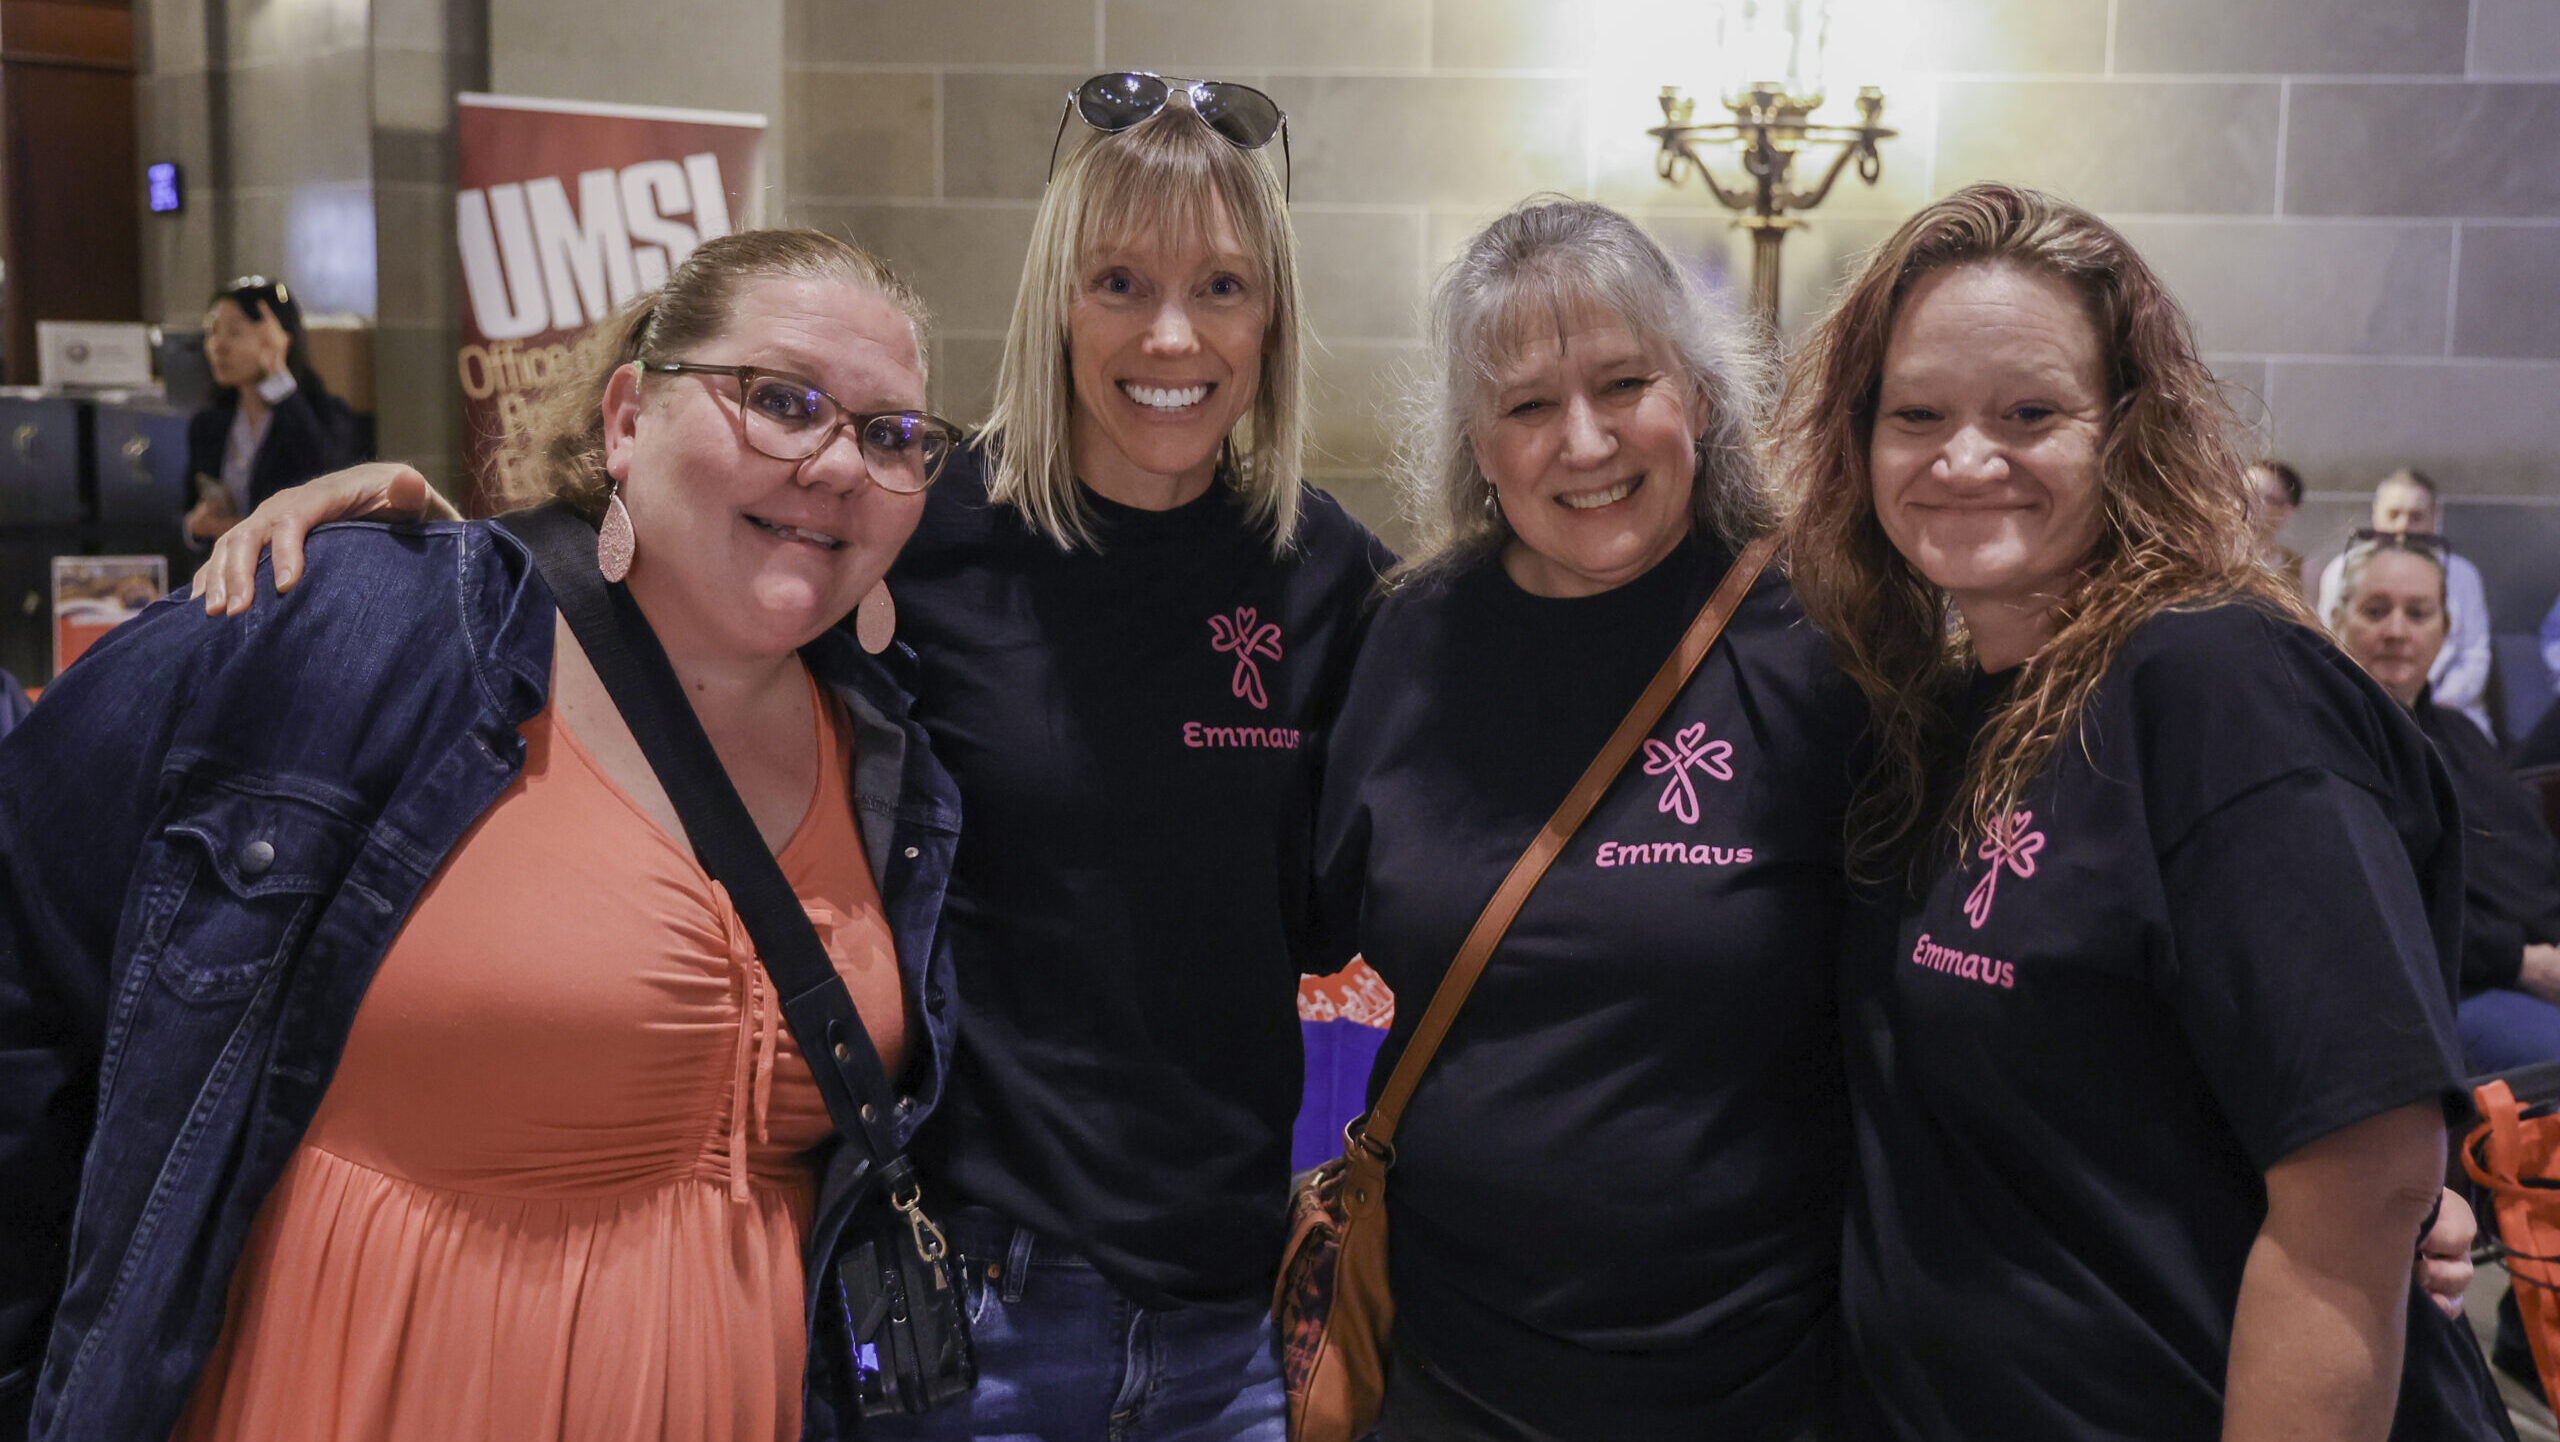 Four women smiling and posing together at an event. They are wearing Emmaus t-shirts, and one of them is also wearing a coral-colored dress and glasses. The background shows a UMSL banner and a well-lit interior.